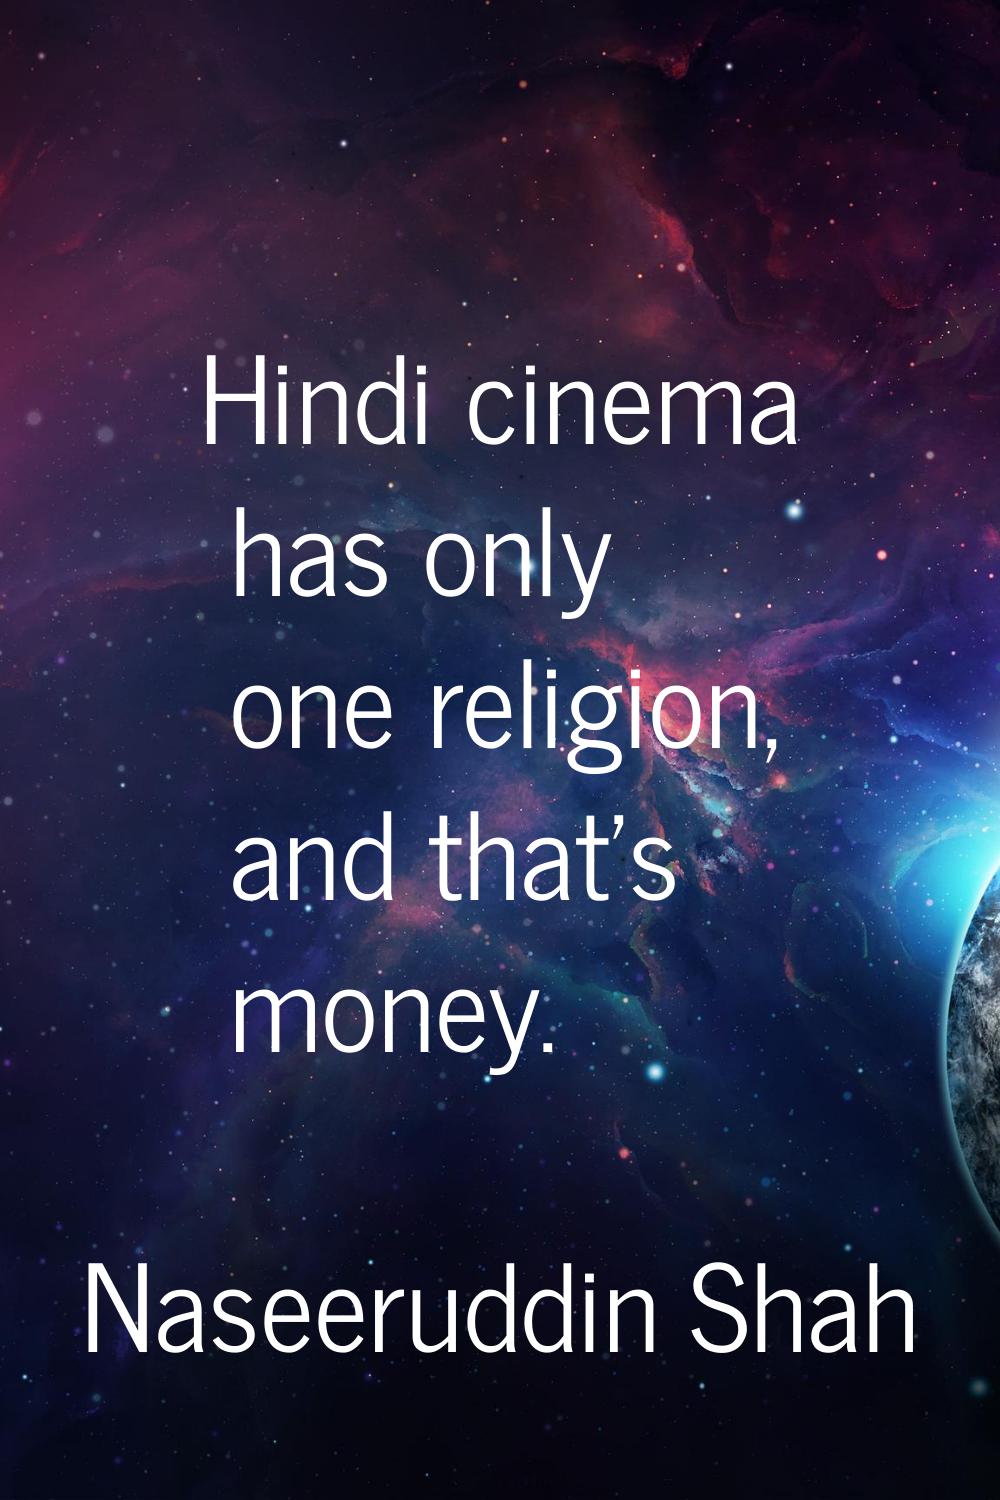 Hindi cinema has only one religion, and that's money.